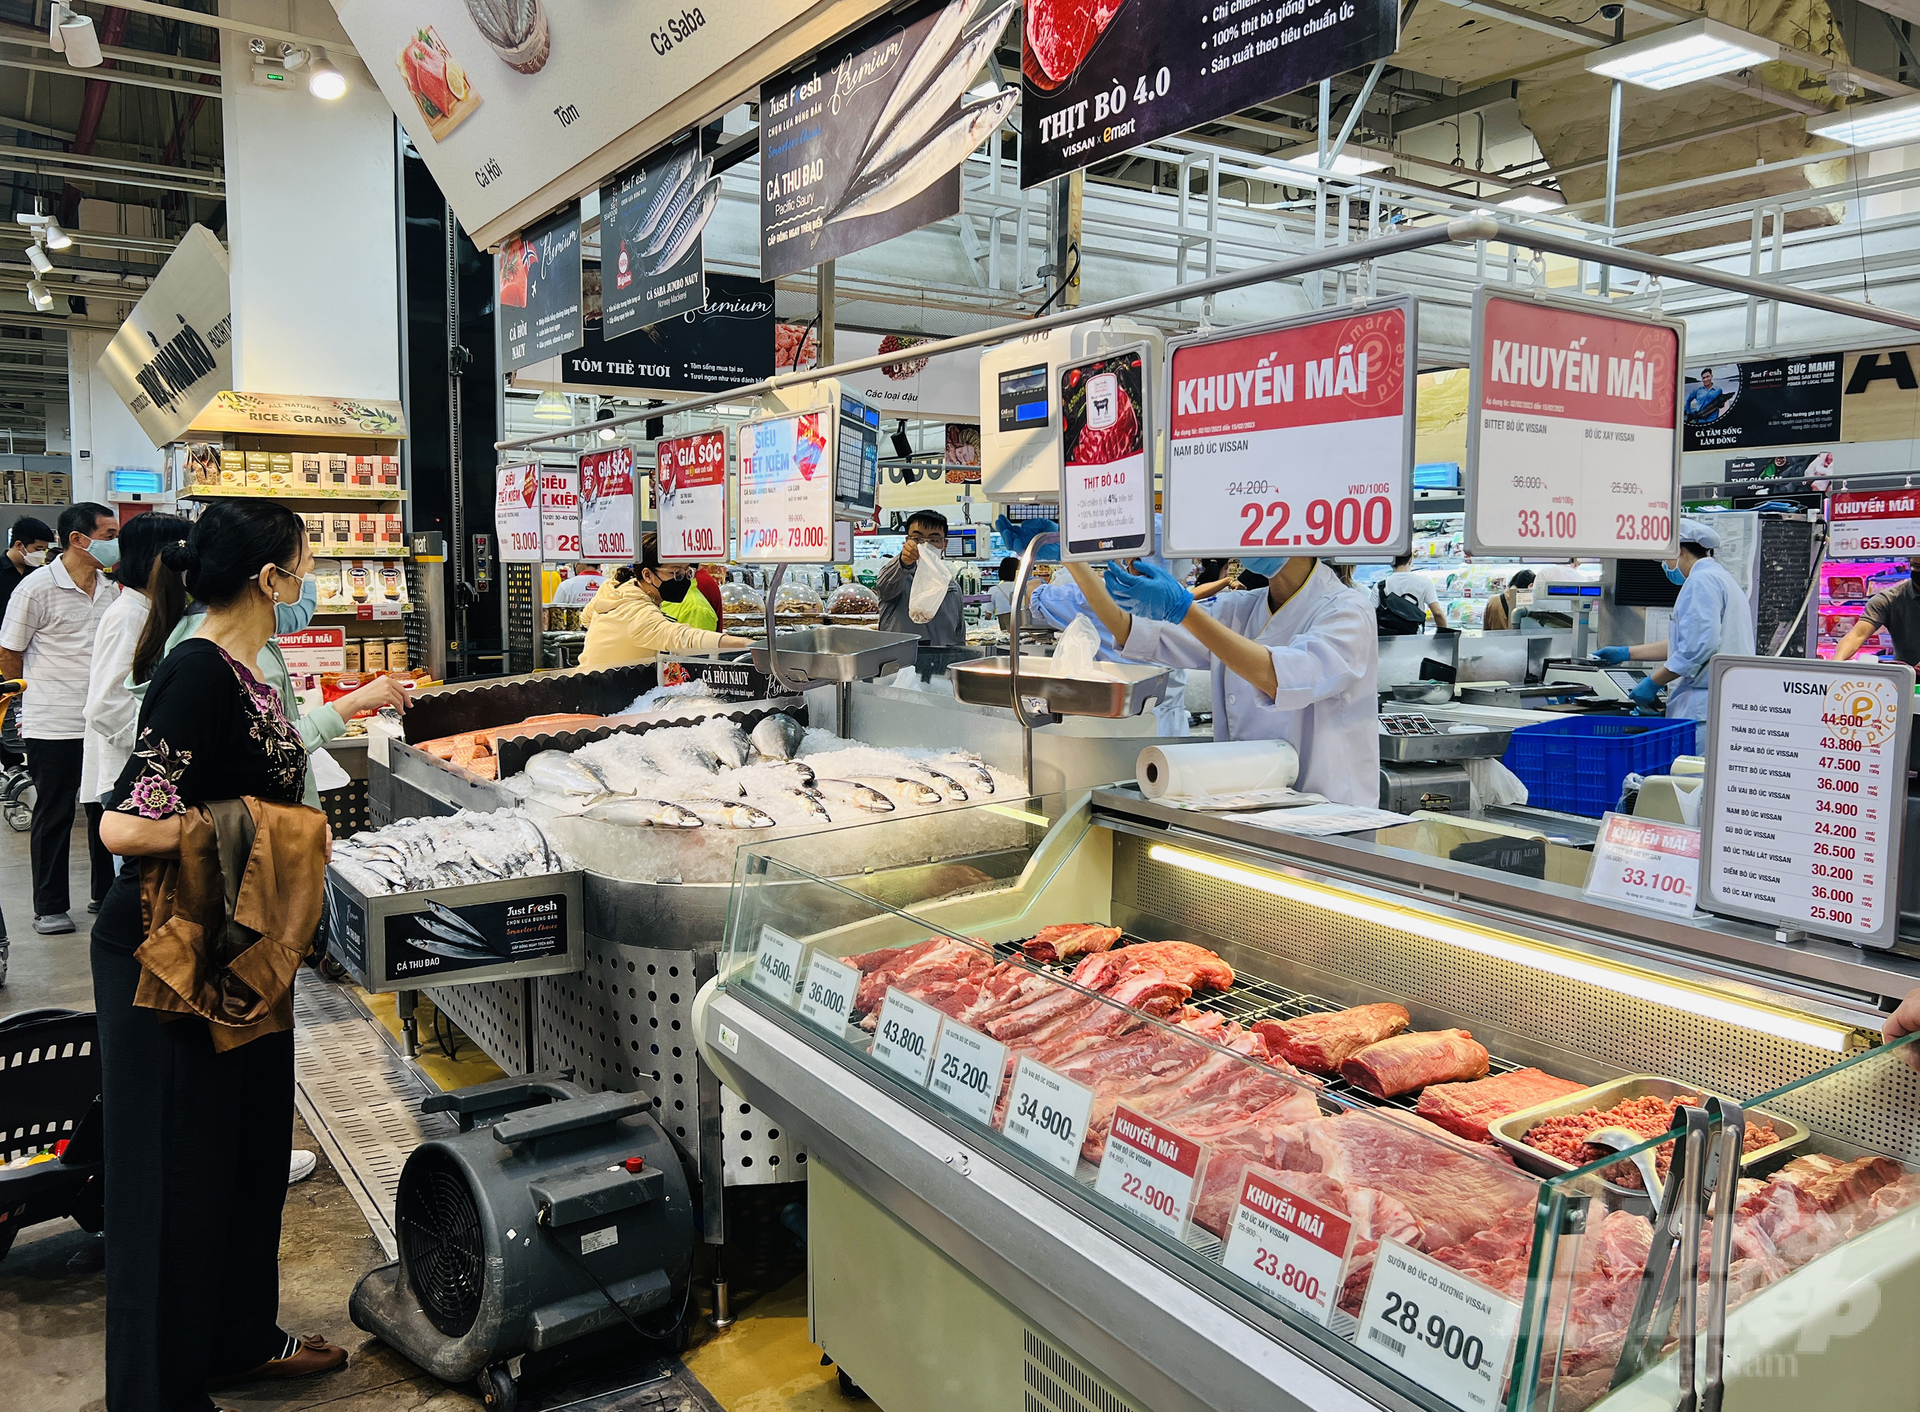 Modern supermarkets launch many promotions to stimulate consumer demand. Photo: Nguyen Thuy.